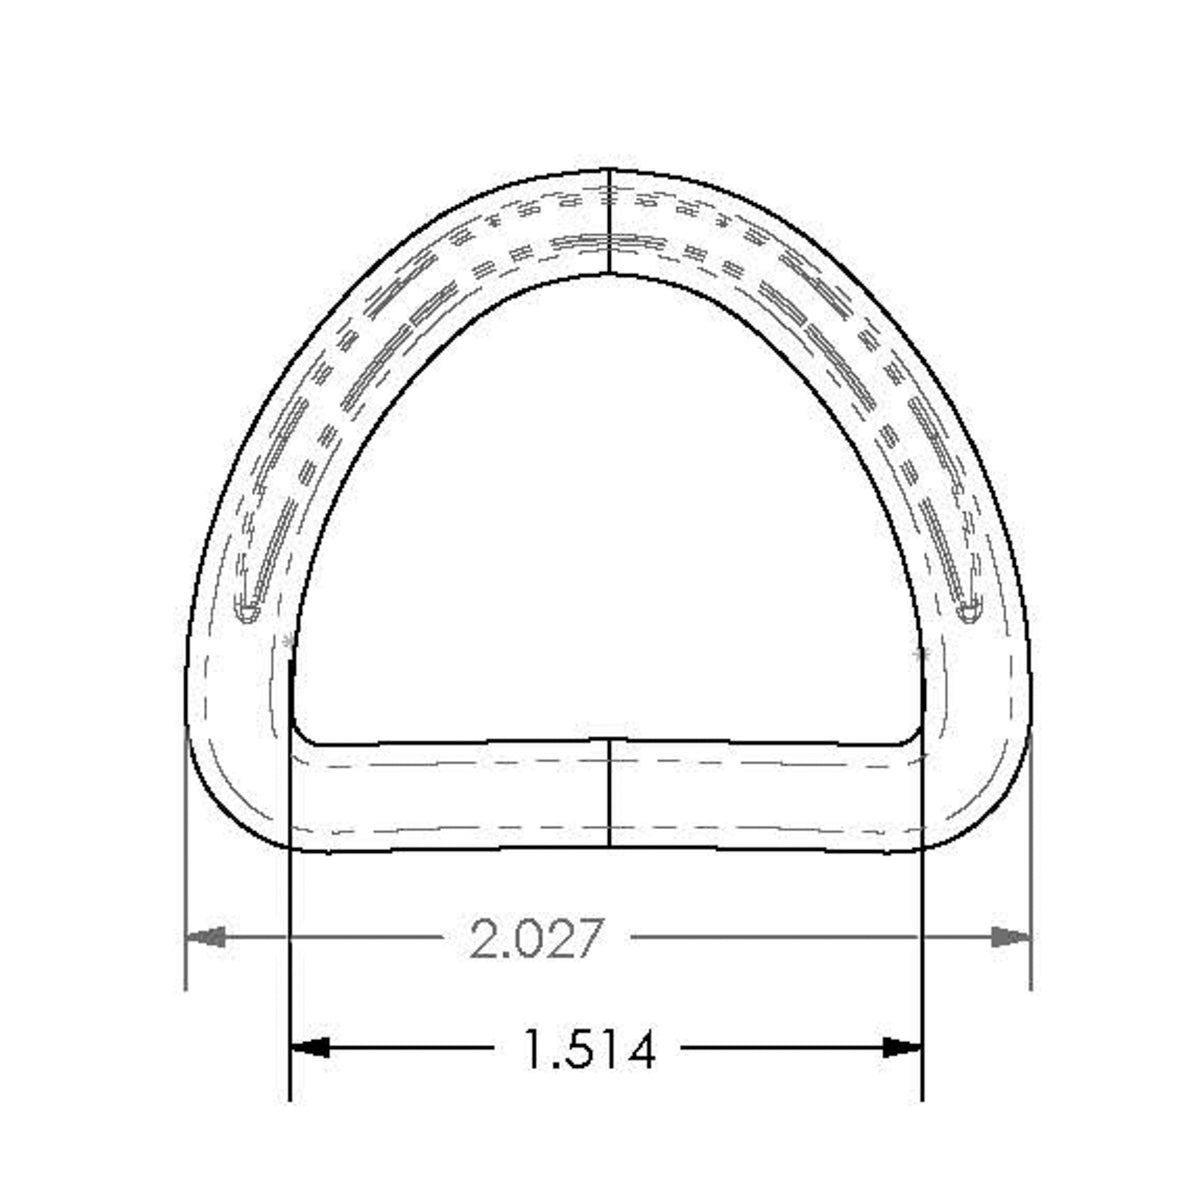 Arch - Horseshoe Dimensions & Drawings